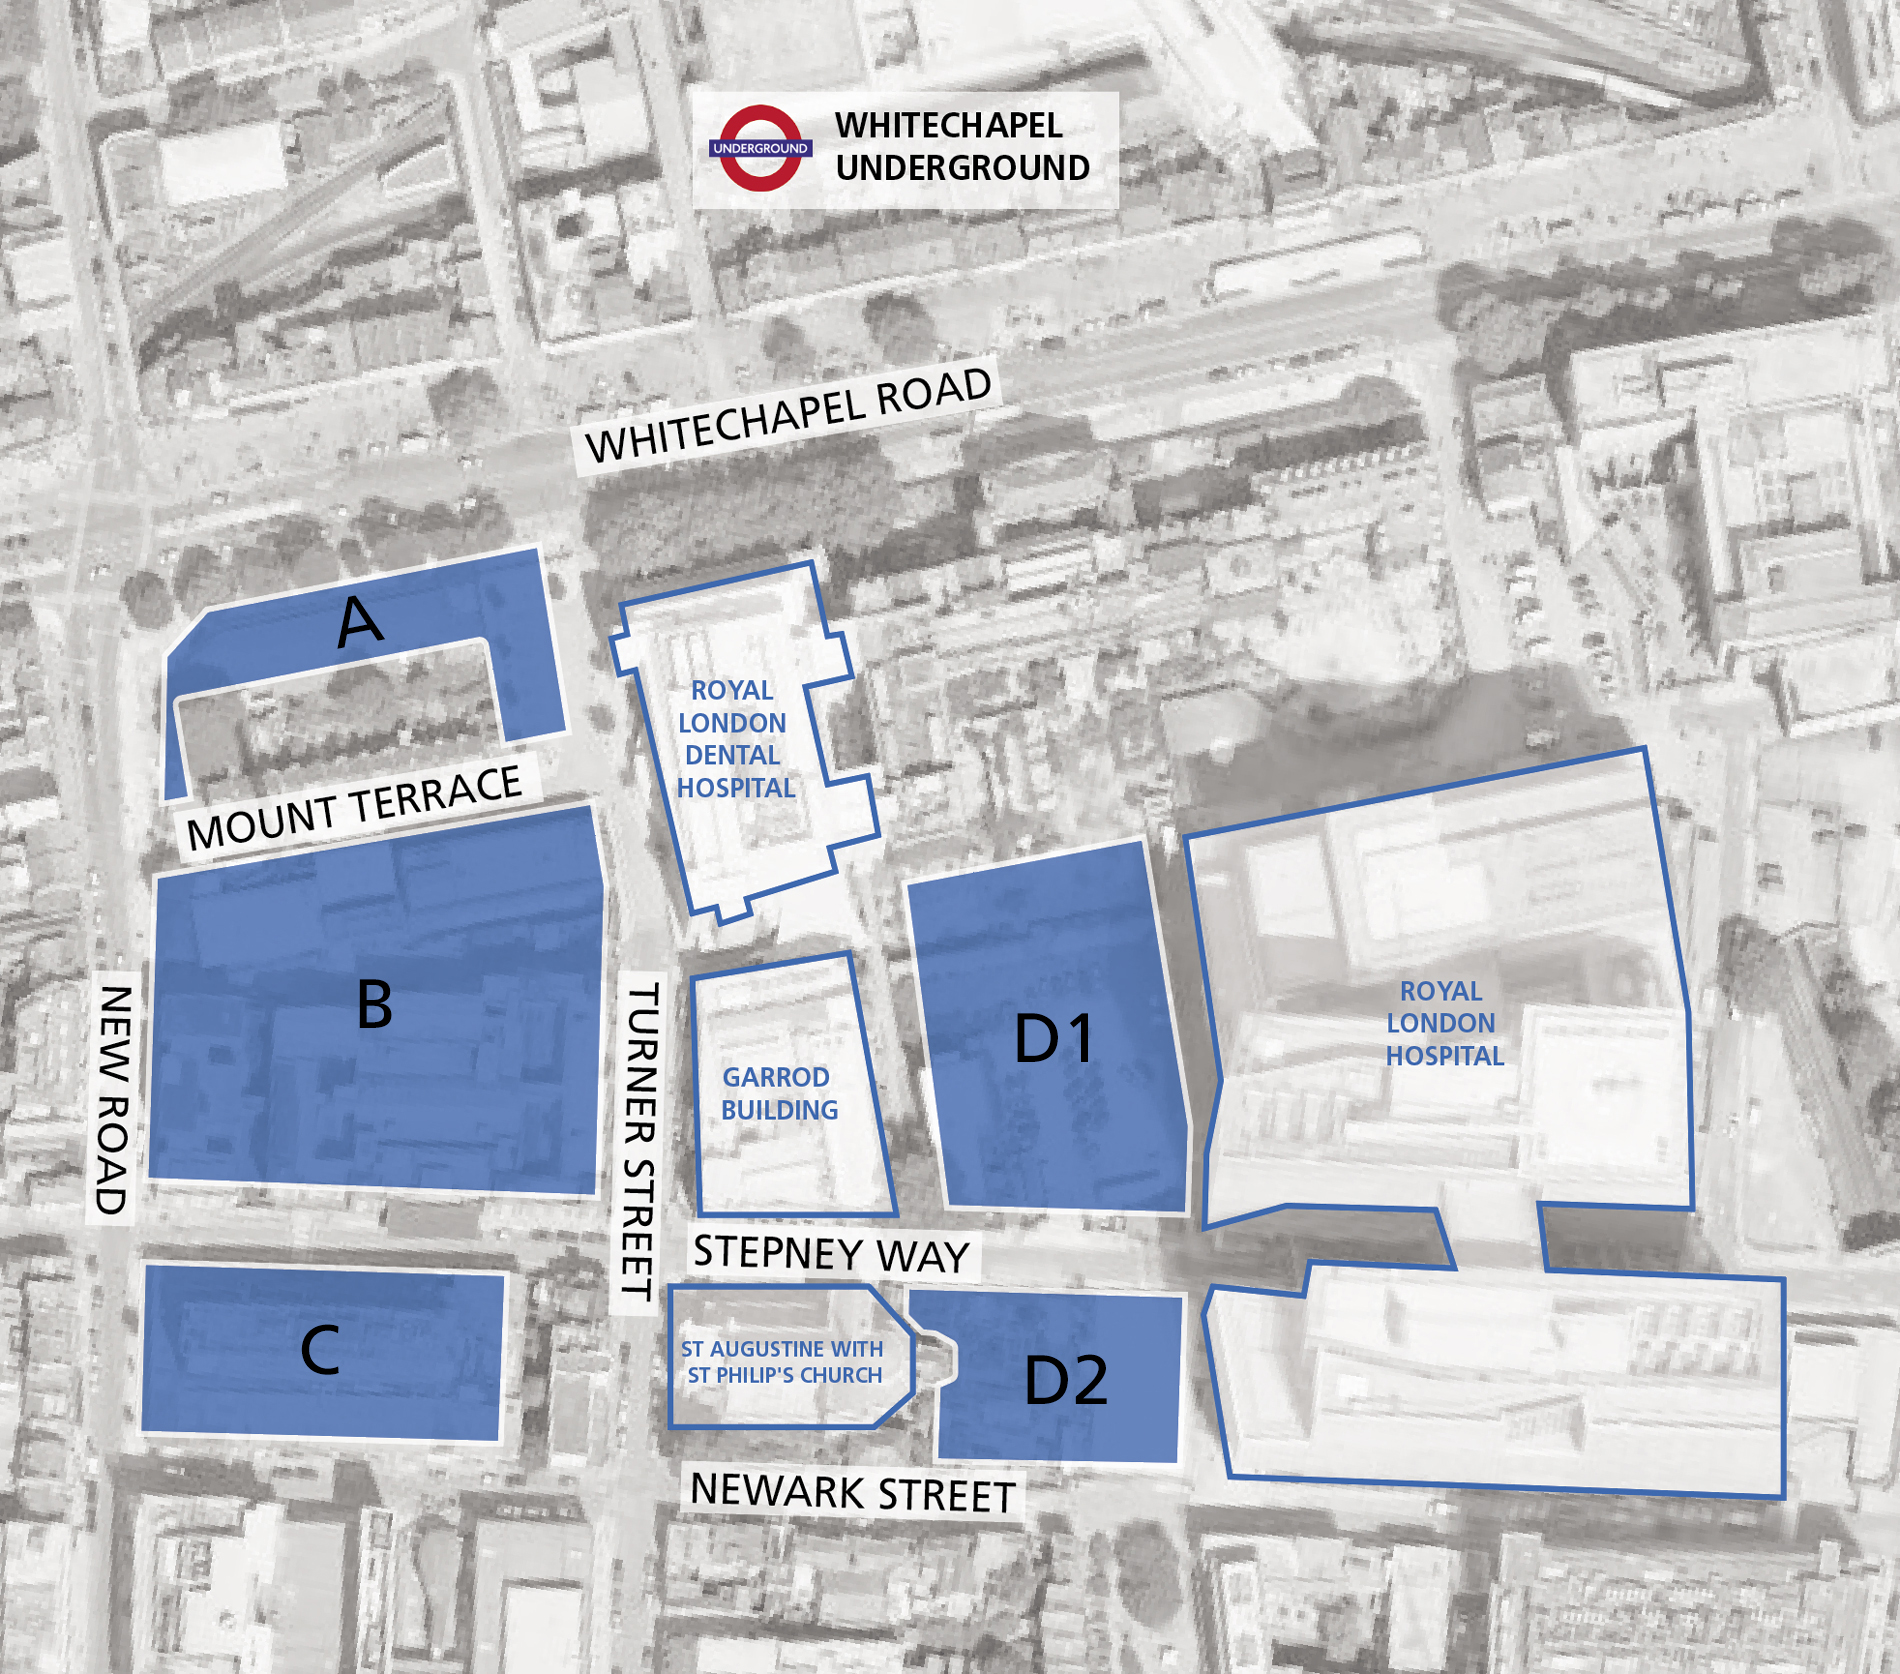 The five sites are highlighted above in blue, with other key buildings nearby outlined.